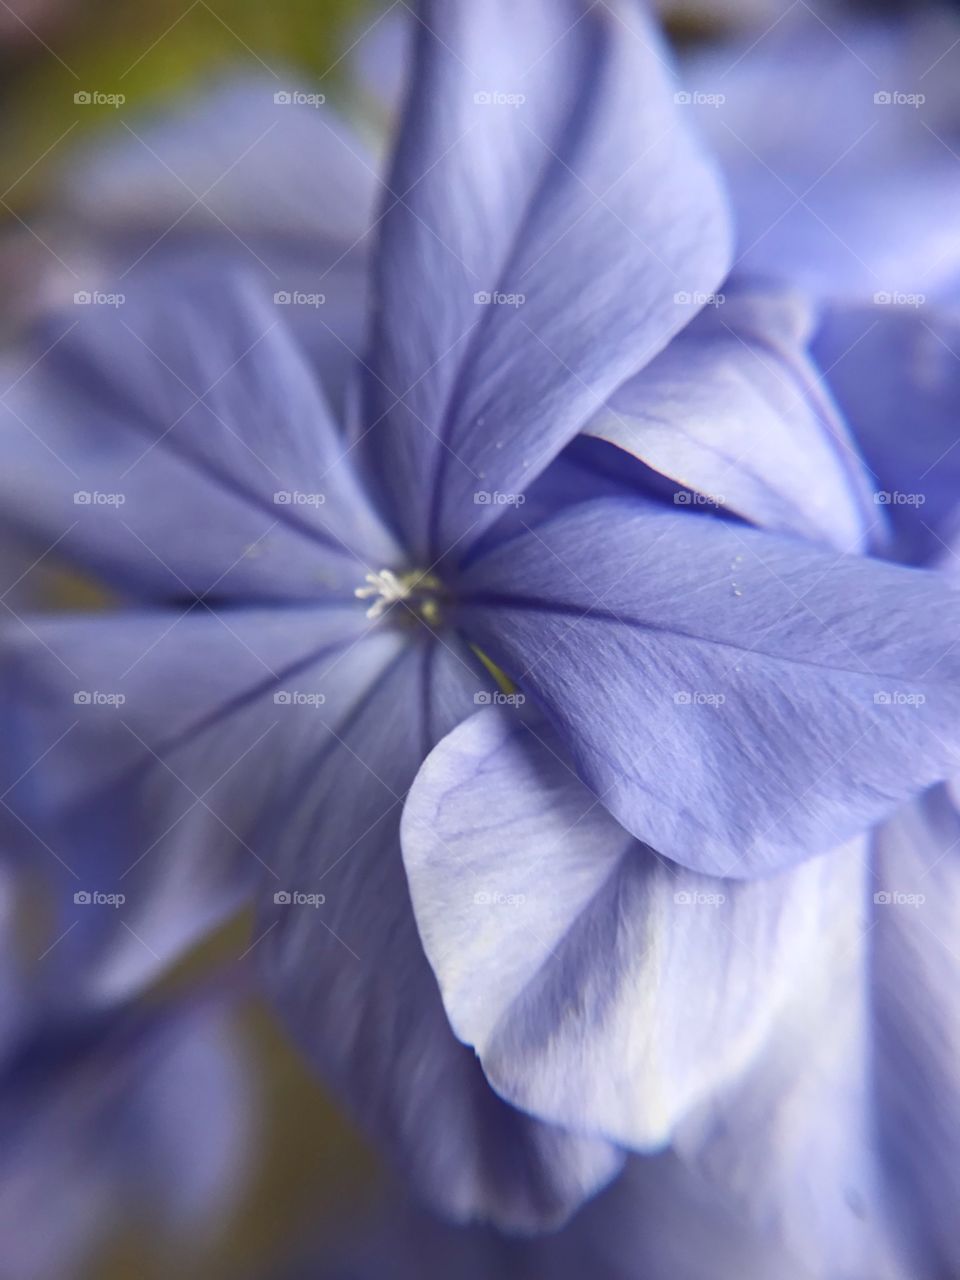 Blue Pedals on a flower